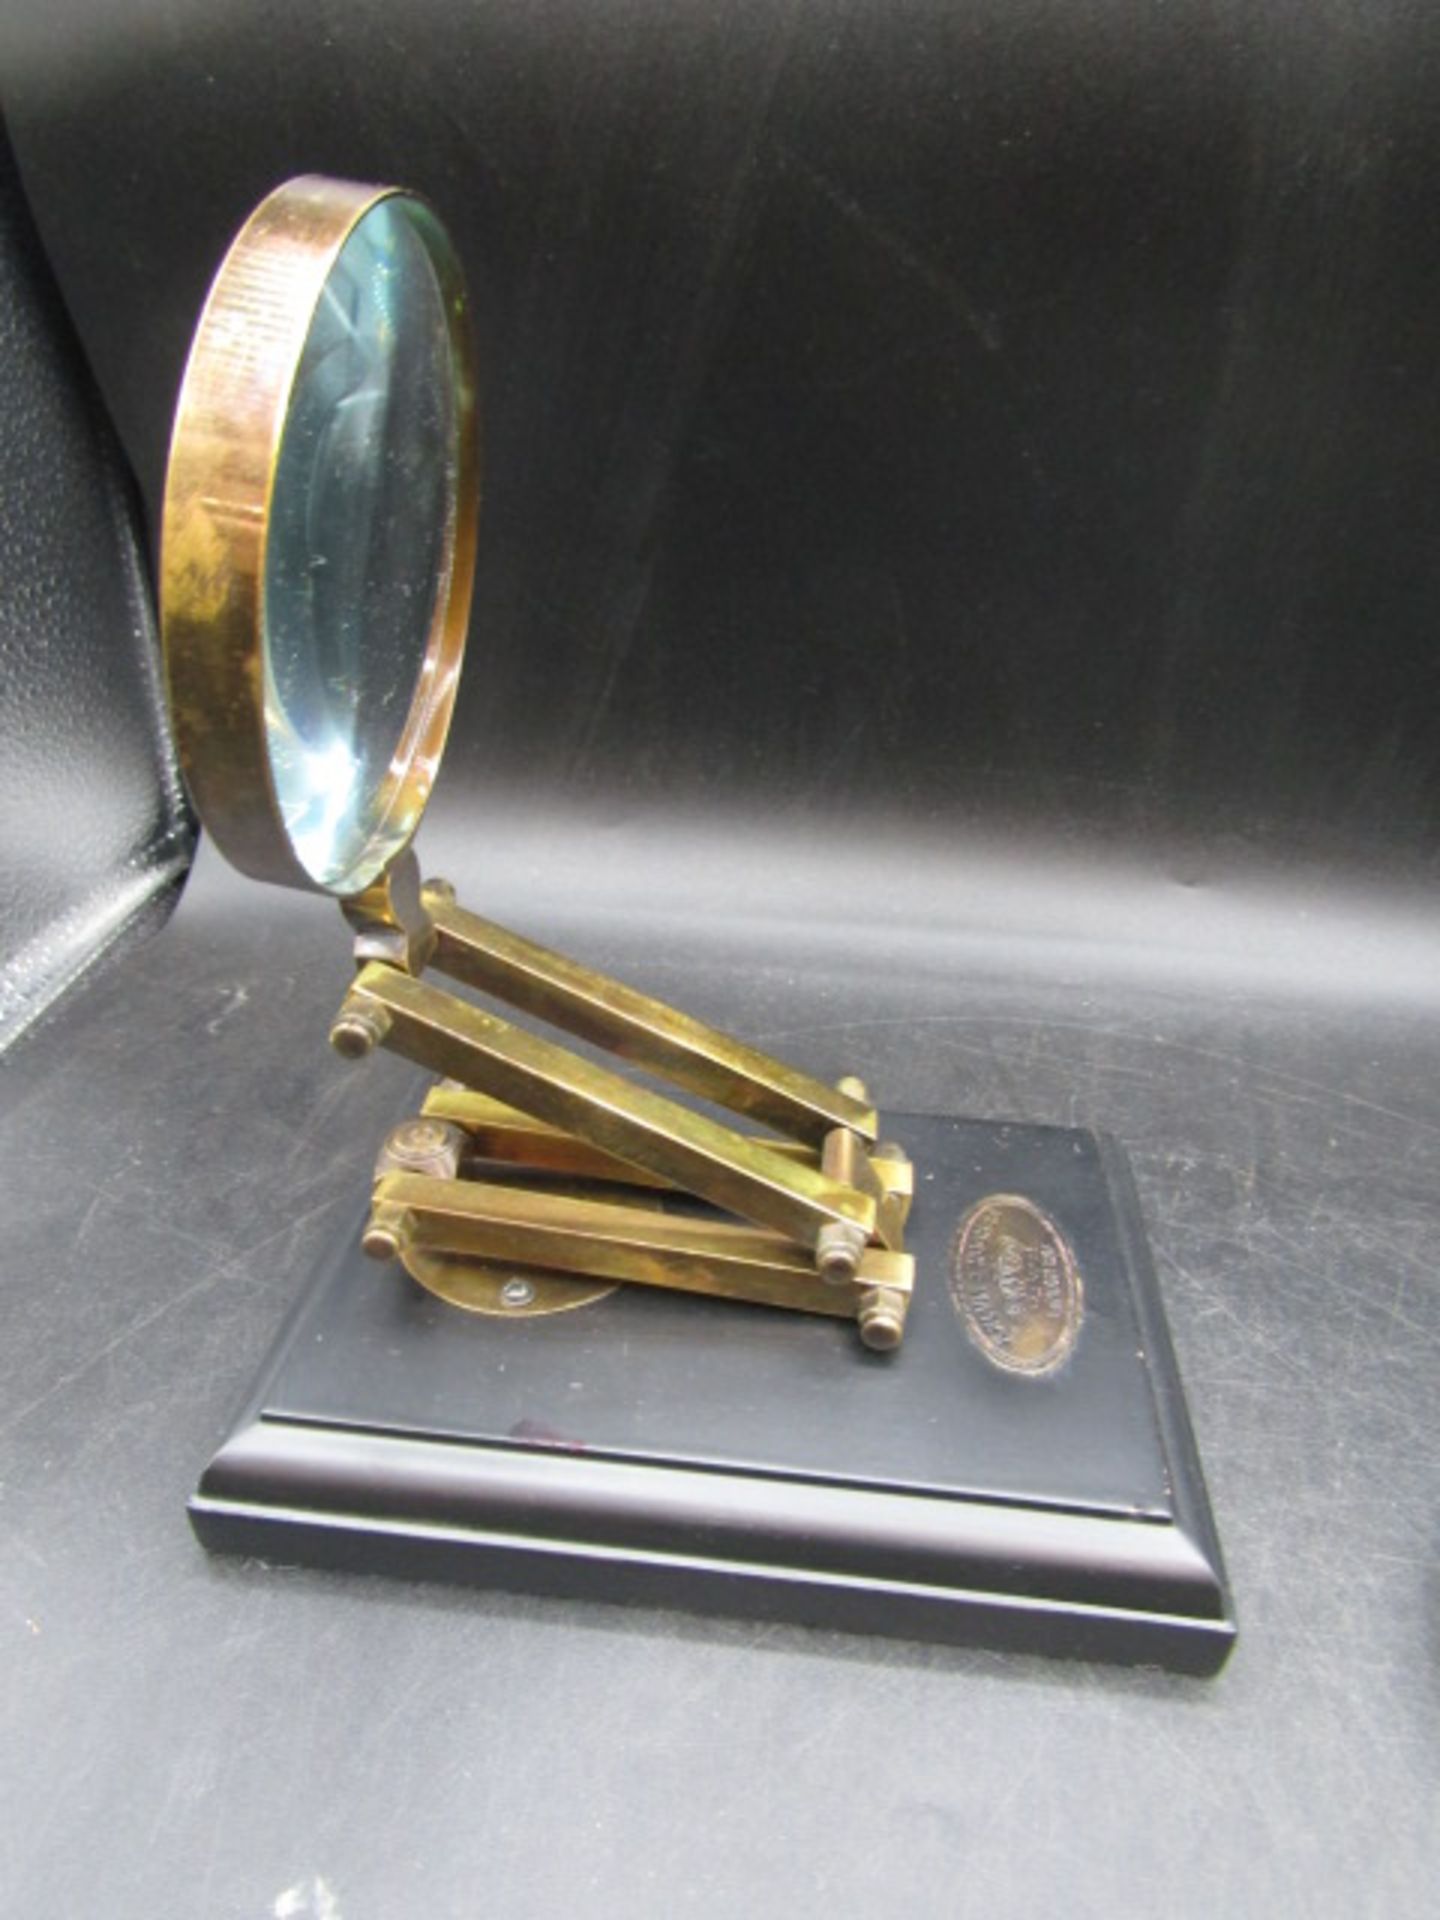 Kelvin & Hughes magnifying glass on stand along with another lens - Image 2 of 3